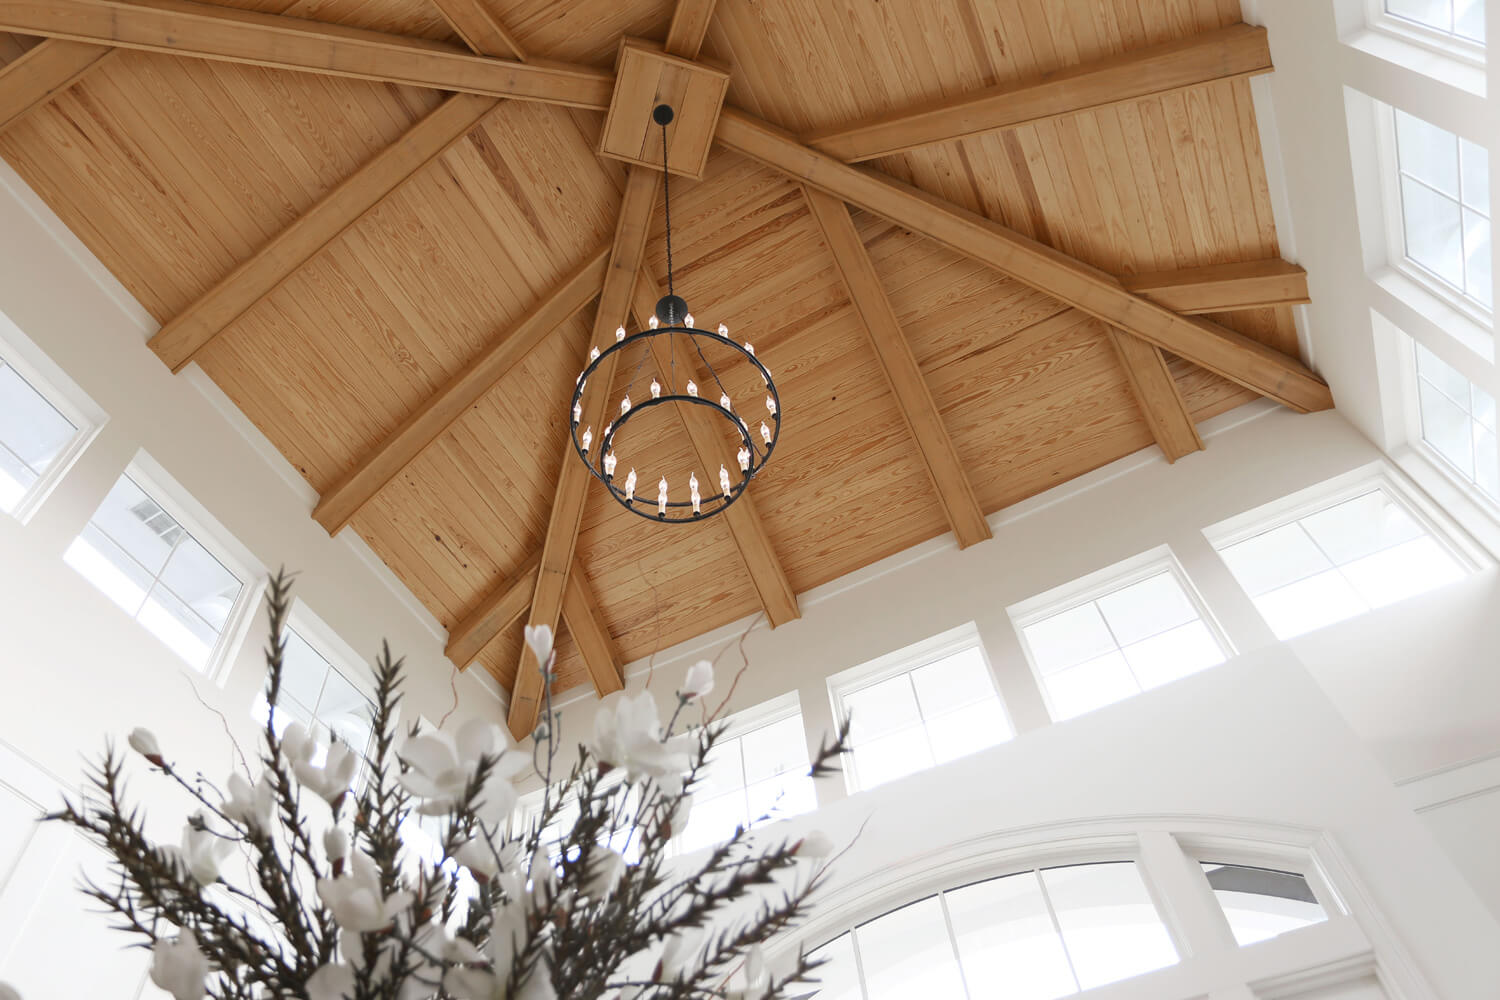 The Morgan Apartments Clubhouse Designed by Foshee Architecture - Interior view of the Wood Tower Ceiling